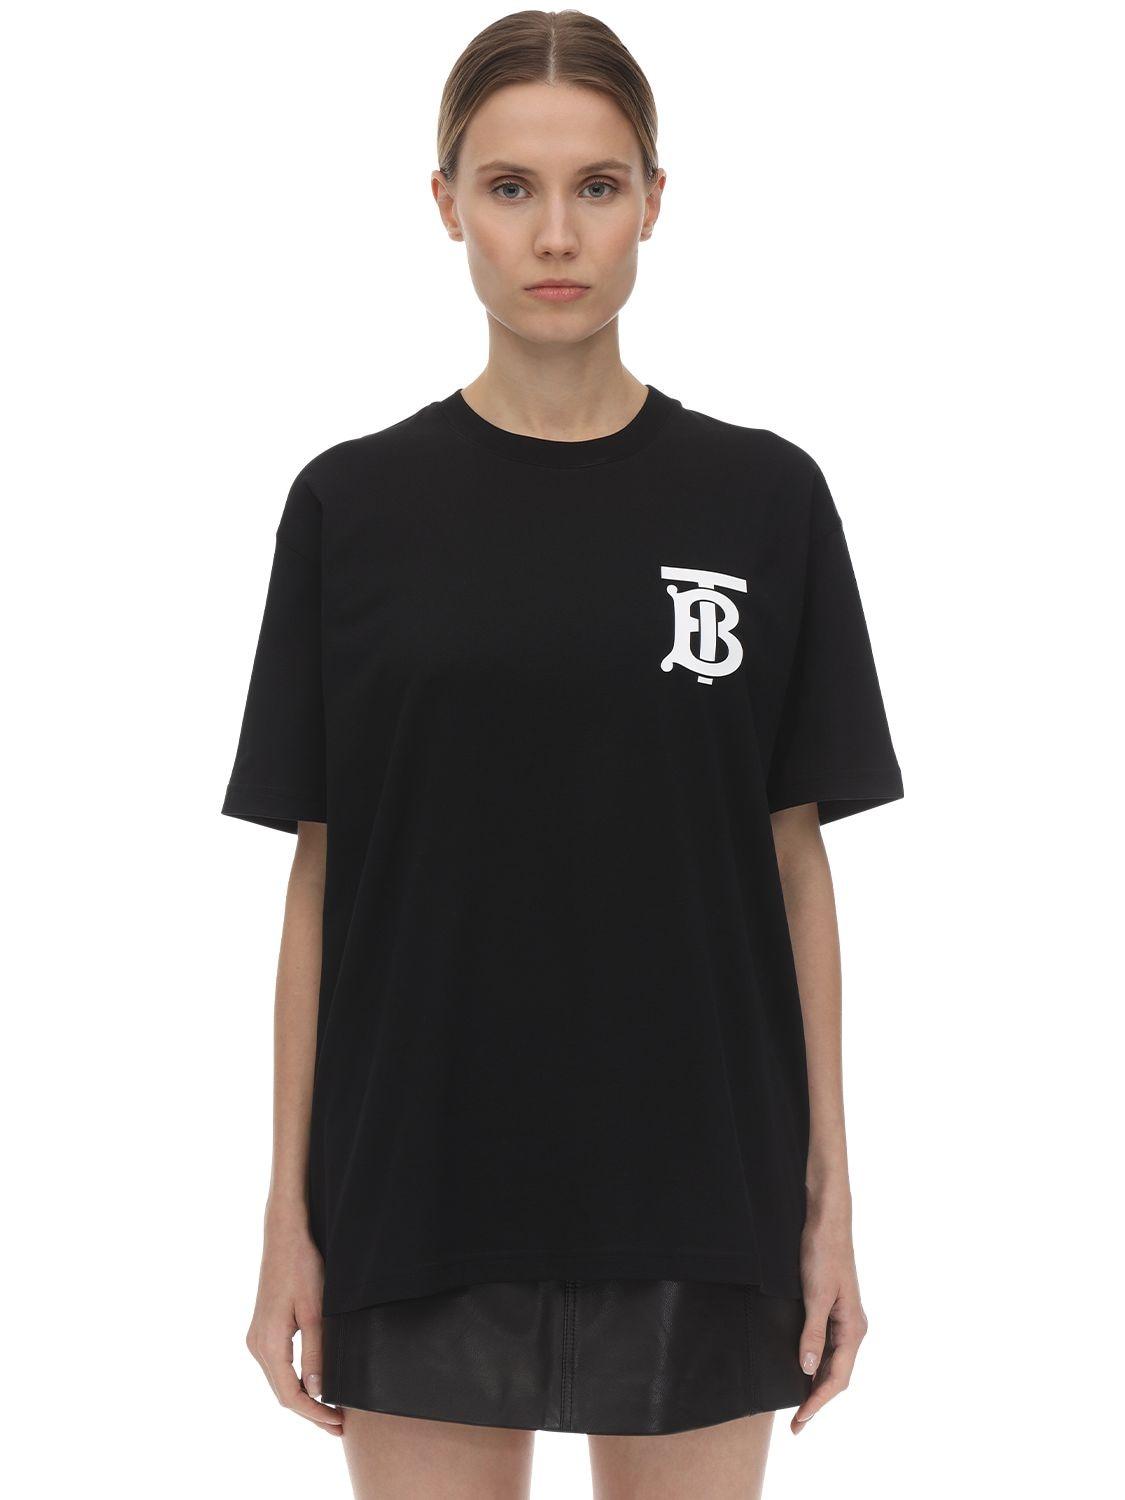 Burberry Oversize Tb Logo Cotton Jersey T-shirt in Black - Lyst